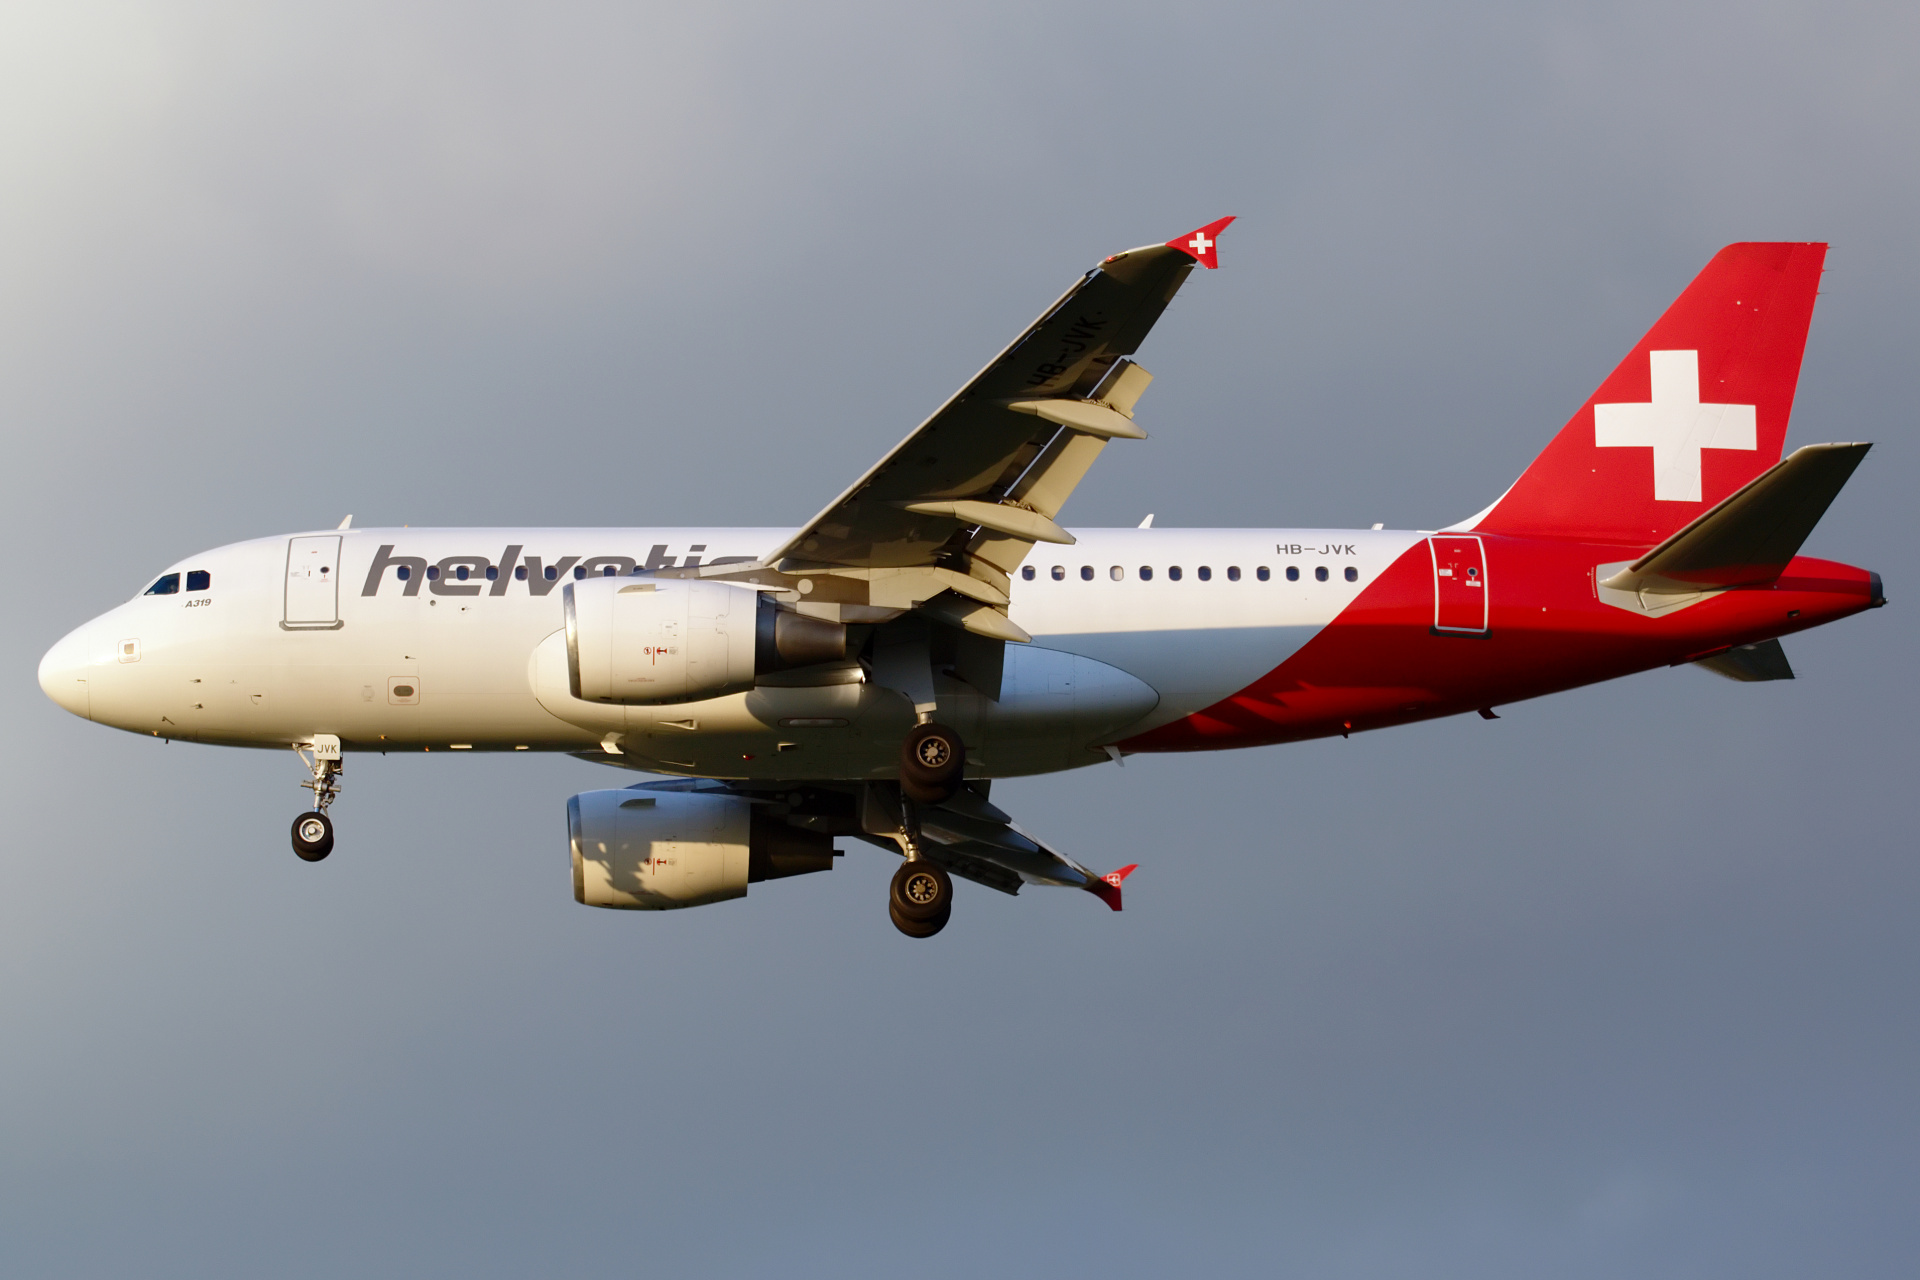 HB-JVK, Helvetic Airways (Aircraft » EPWA Spotting » Airbus A319-100)